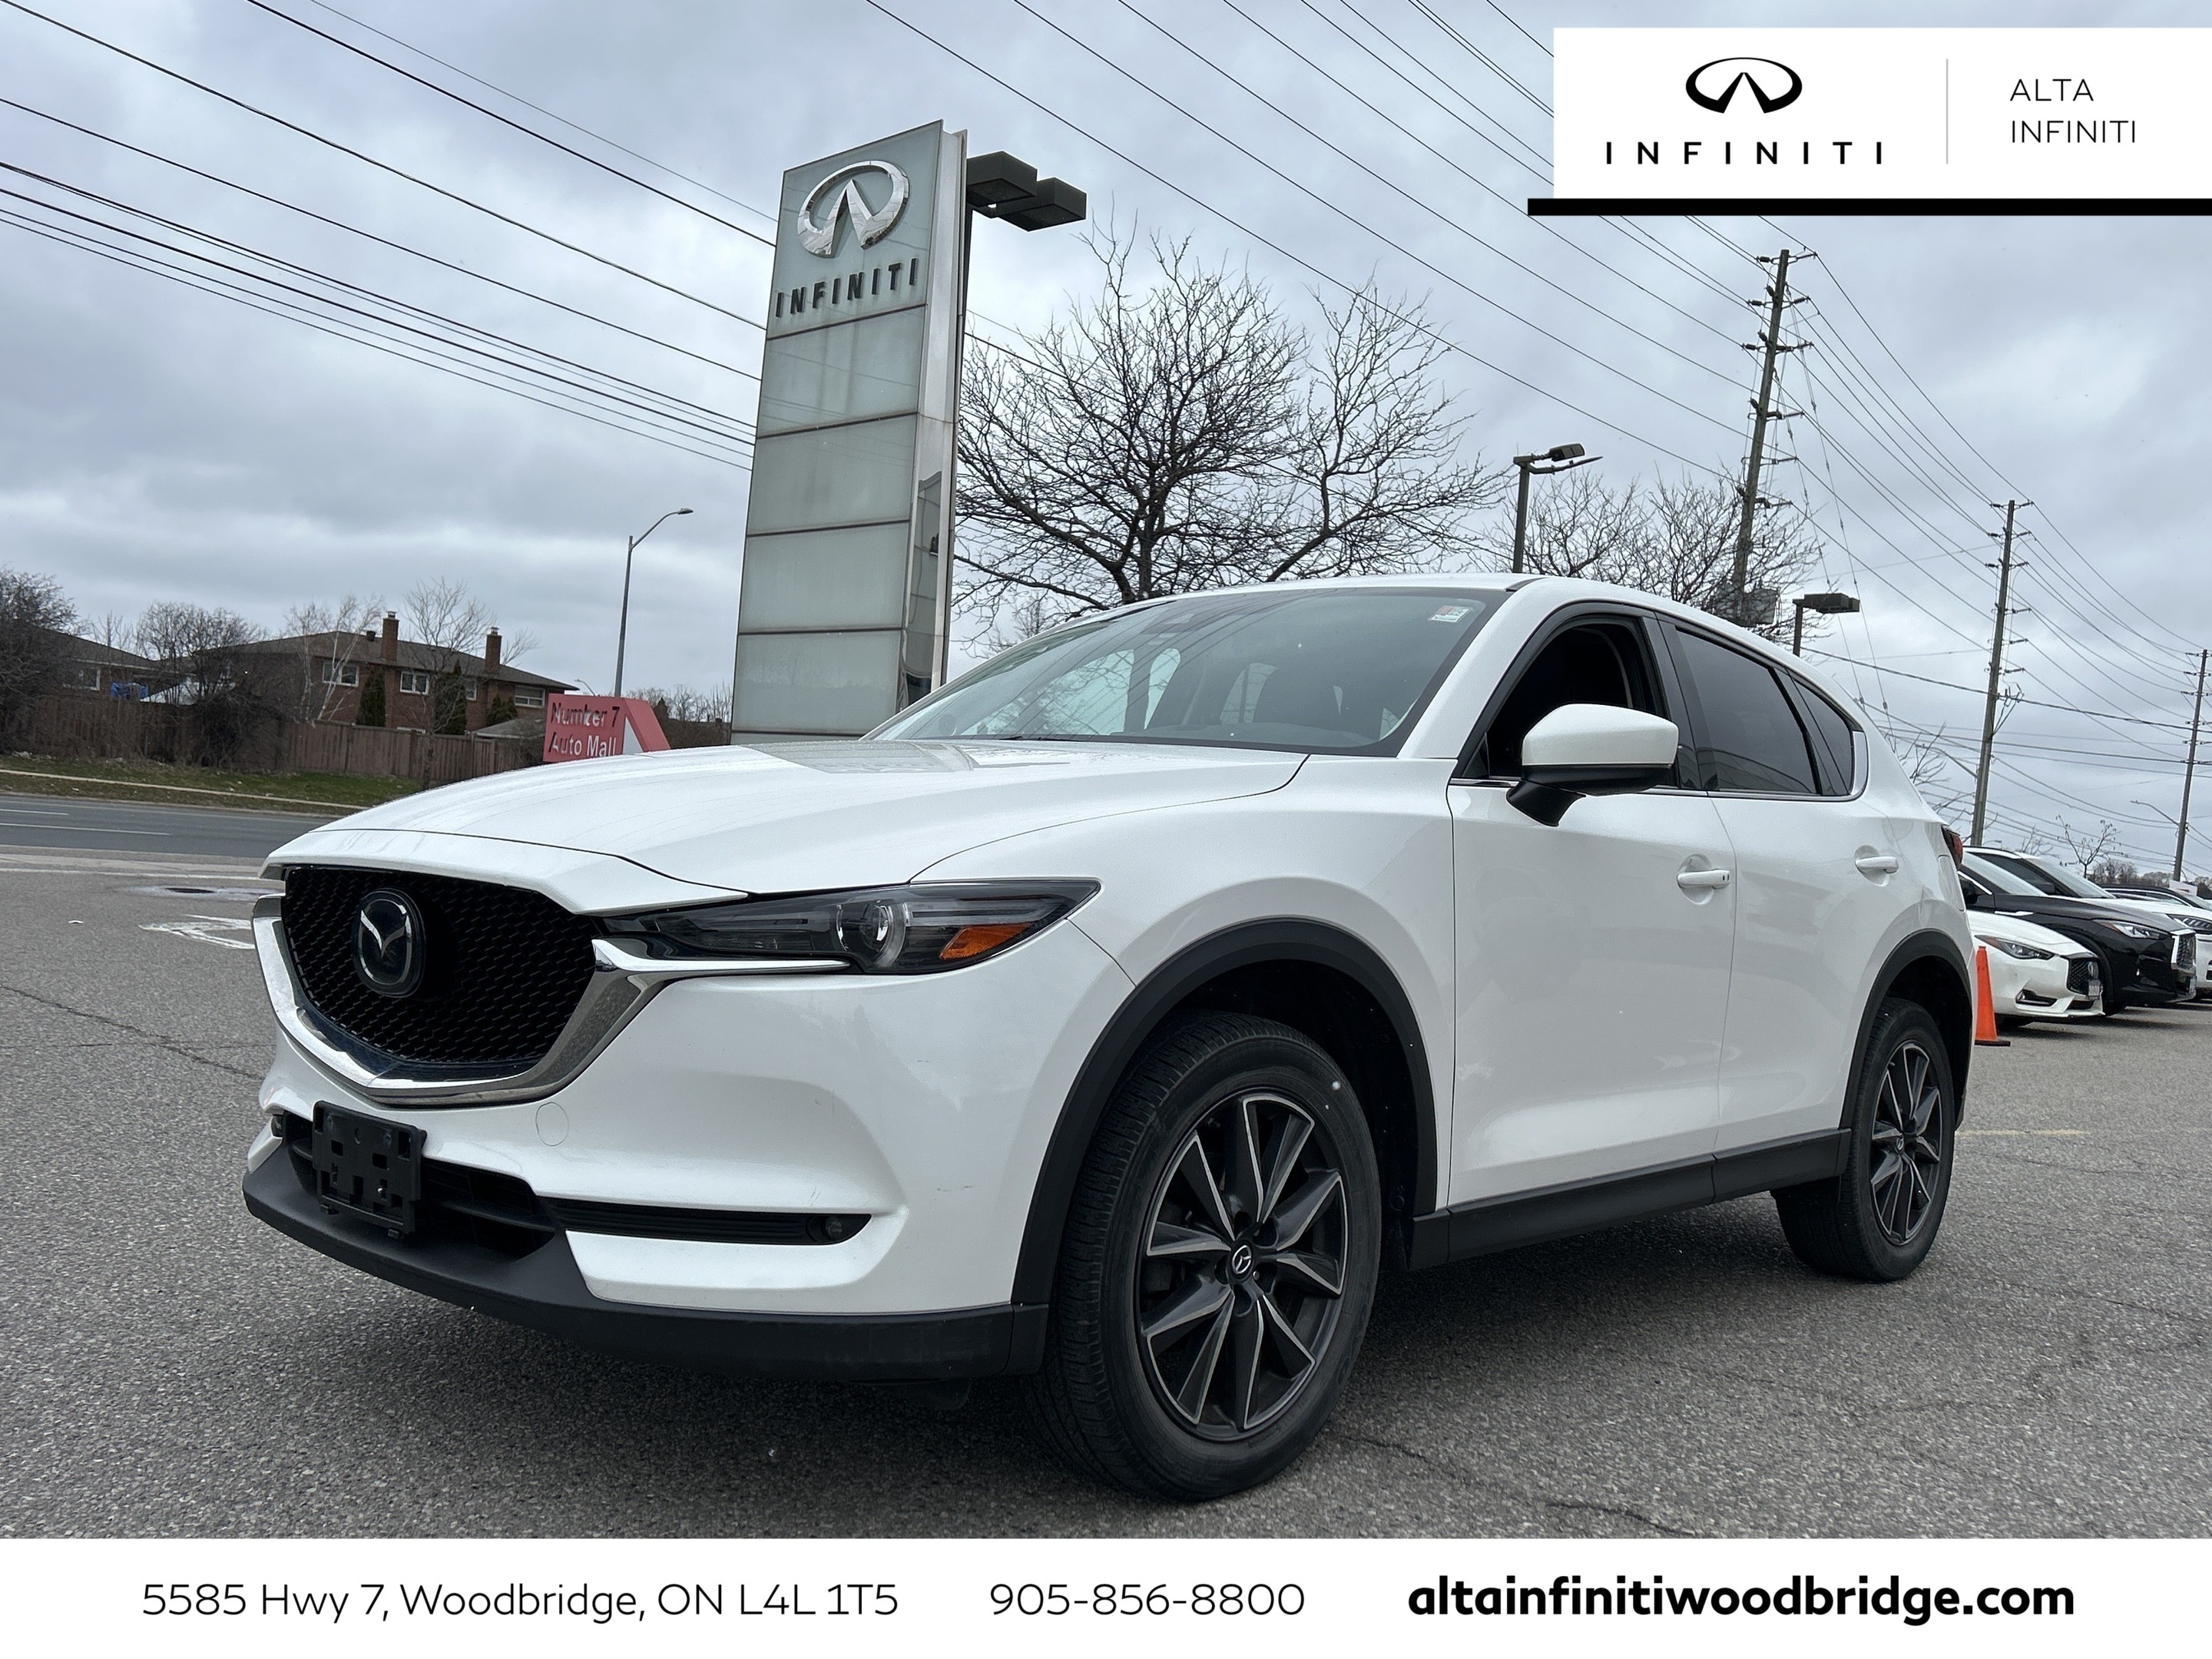 2017 Mazda CX-5 GT / BOSE AUDIO / NO ACCIDENTS / 2 SETS OF WHEELS